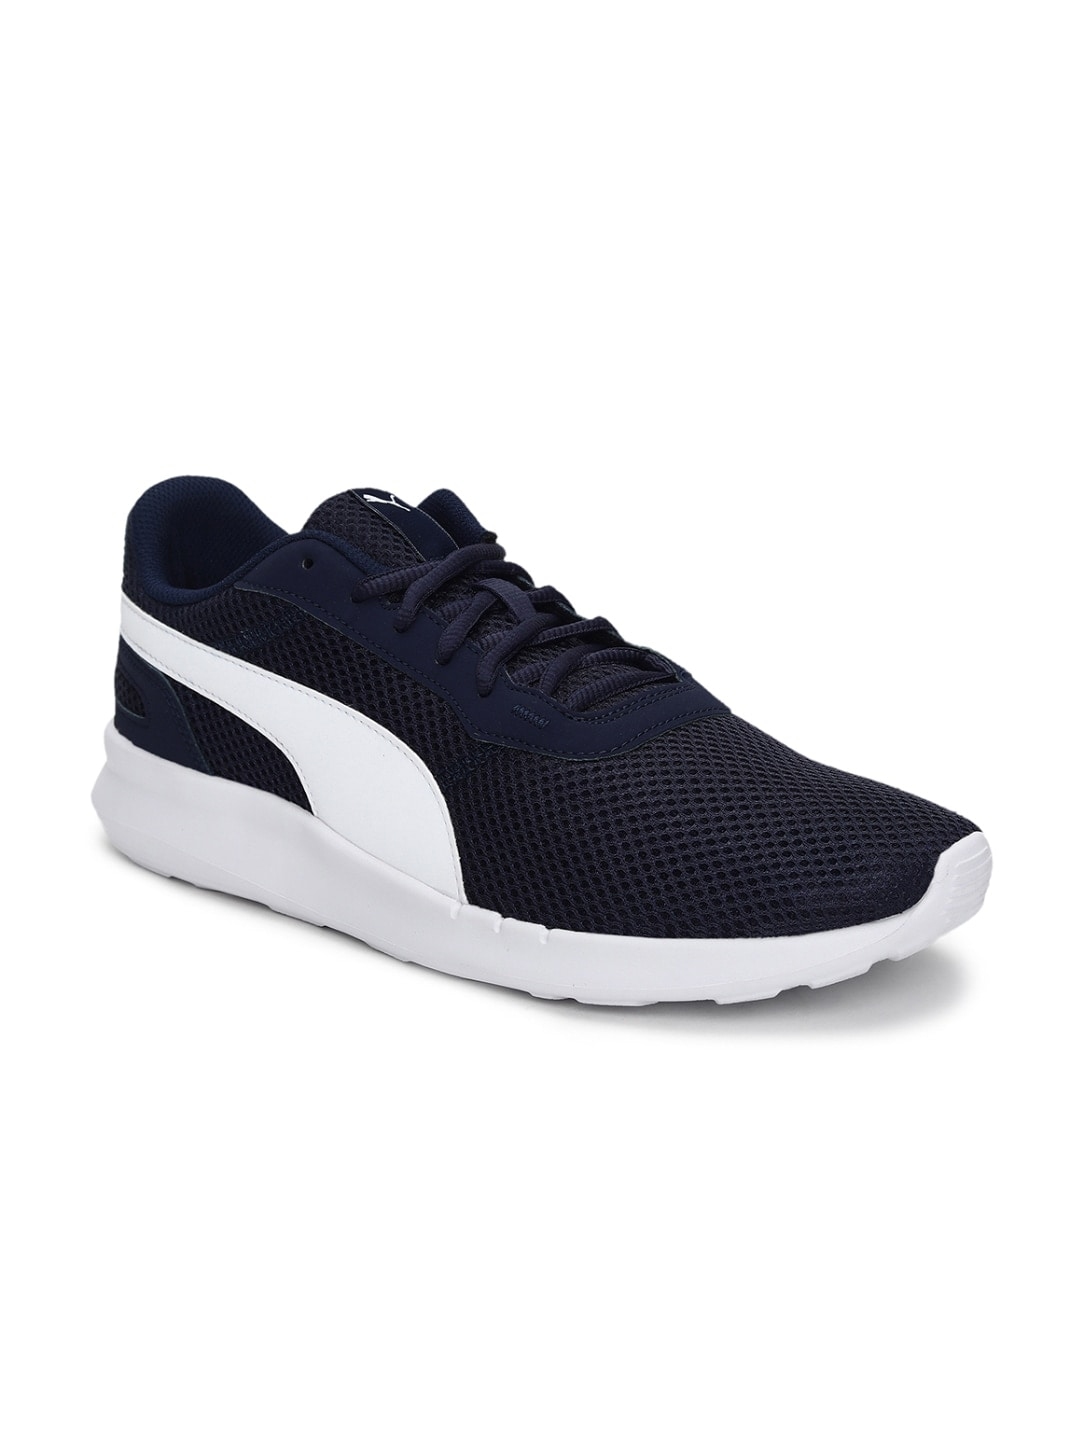 Buy Puma Unisex Navy Blue Cliff Sneakers - Casual Shoes for Unisex ...